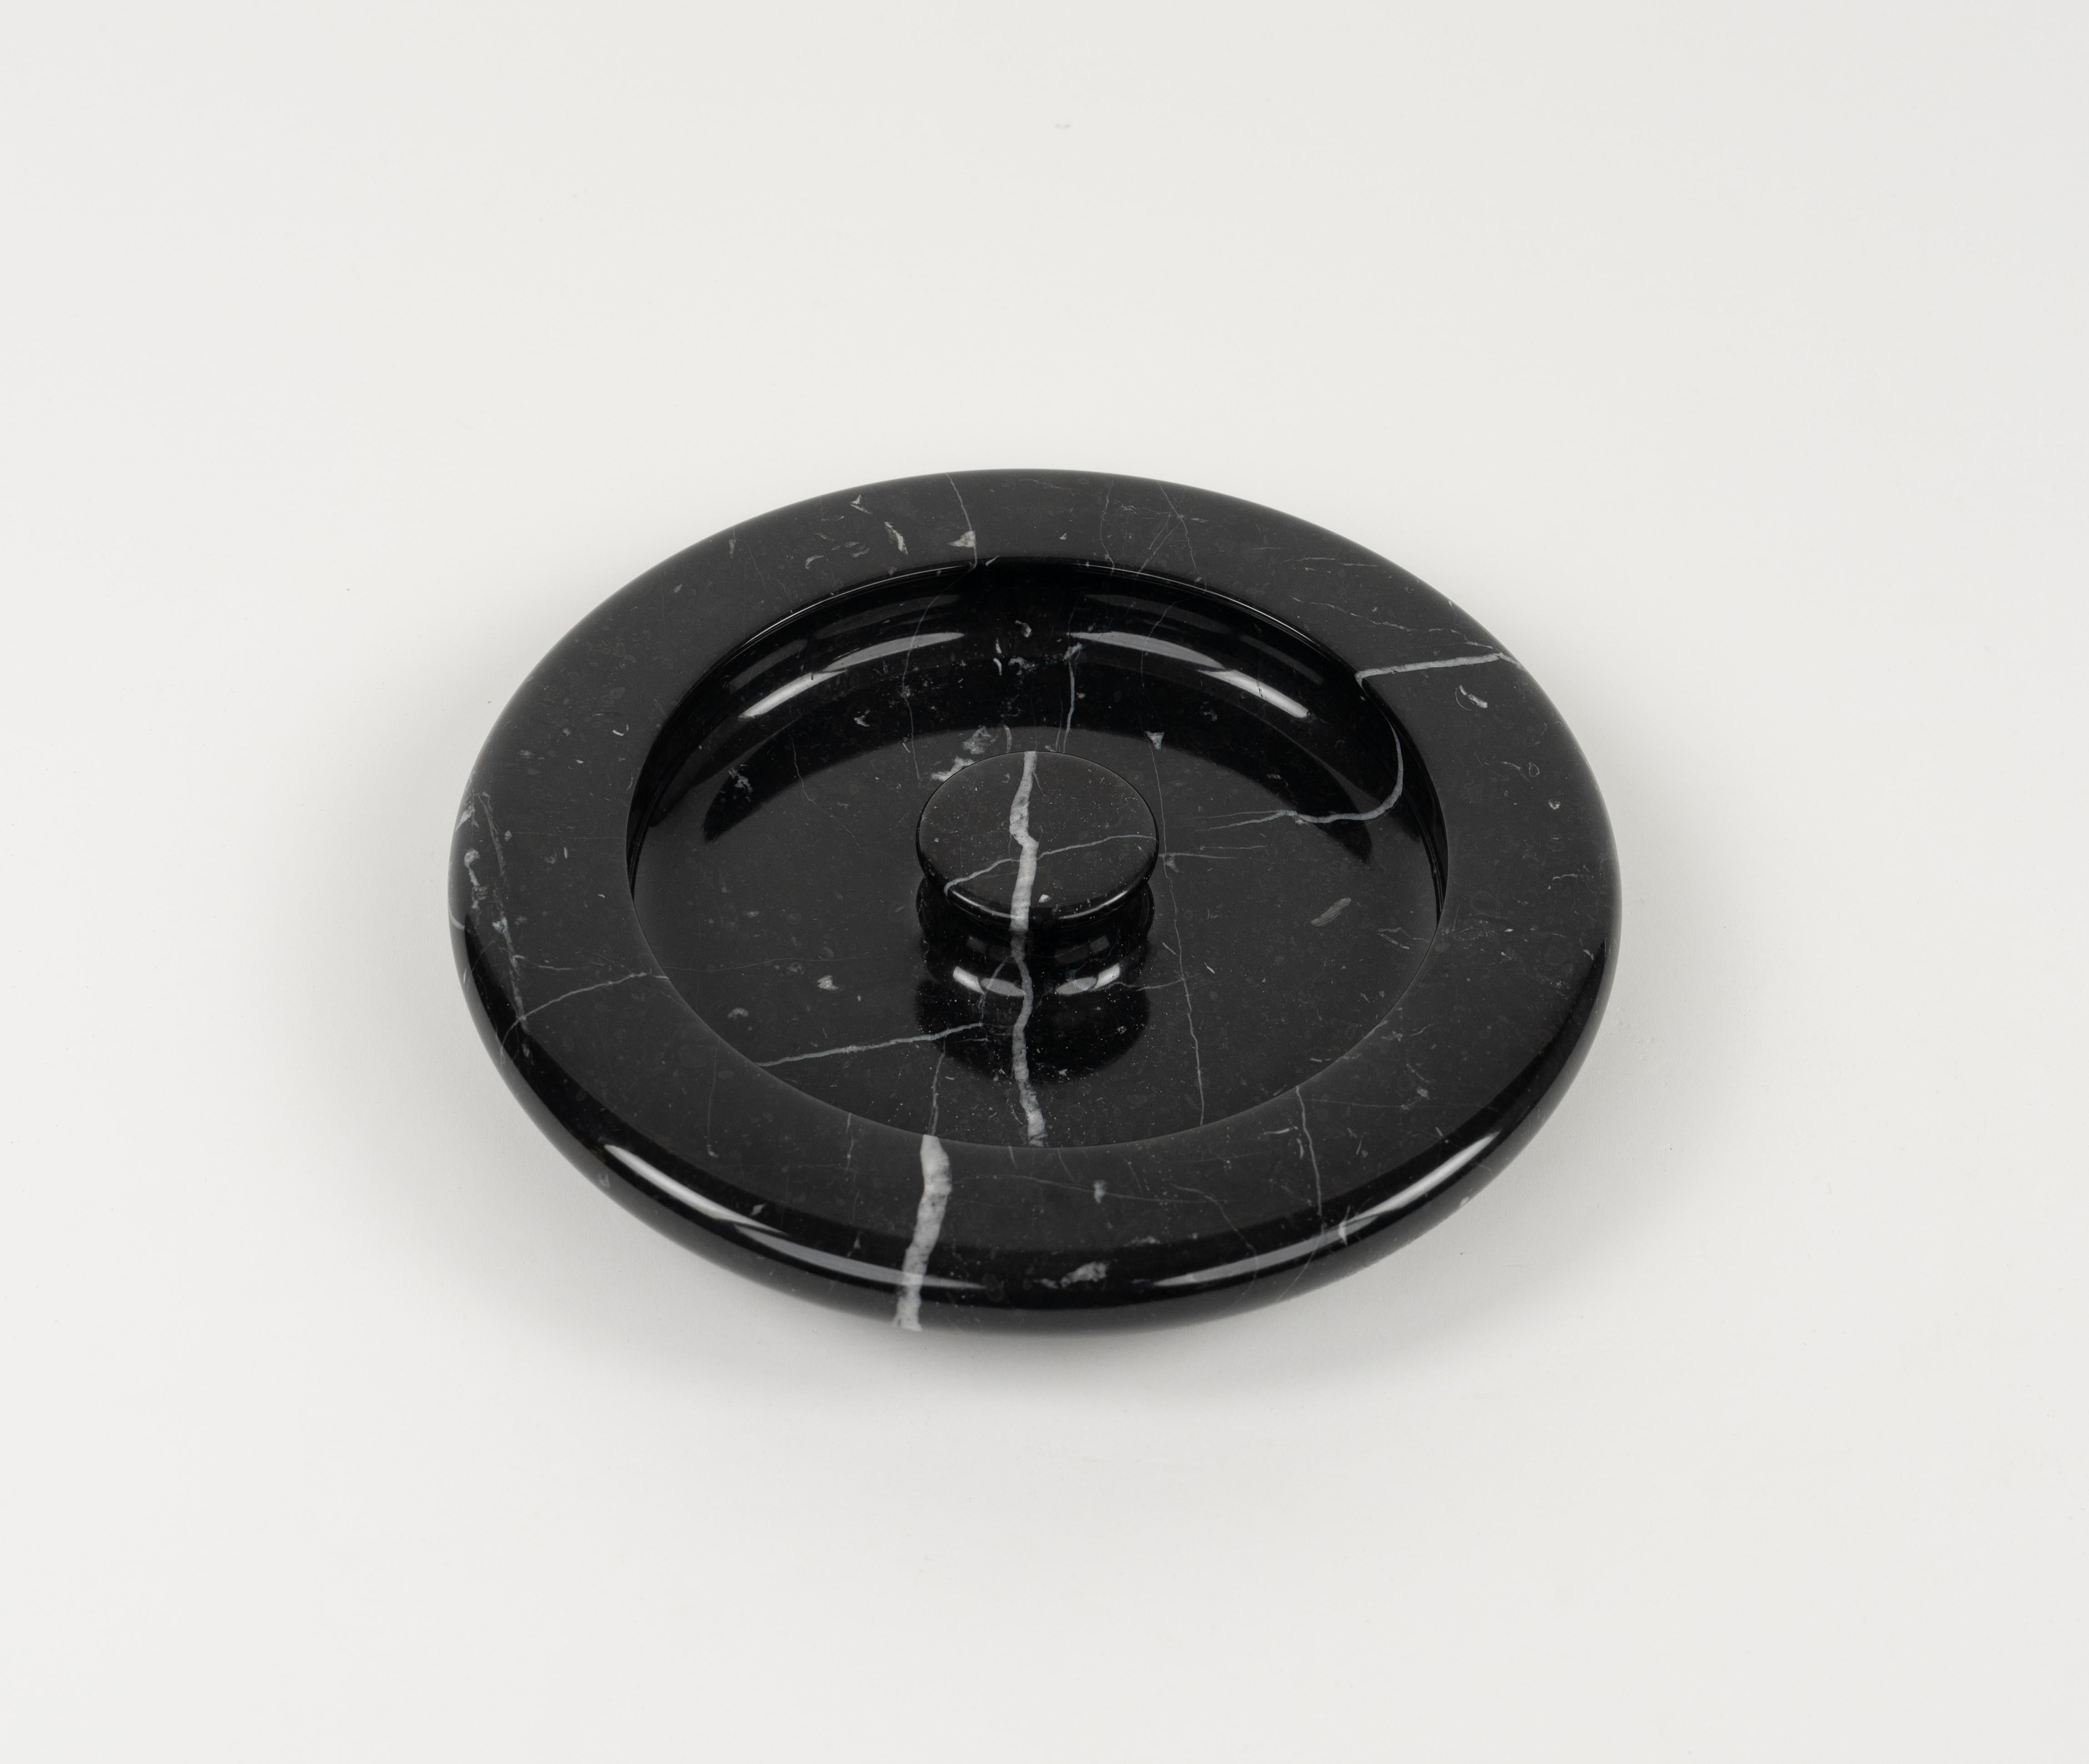 Black Marble Ashtray or Vide-Poche attributed to Angelo Mangiarotti, Italy 1970s For Sale 11